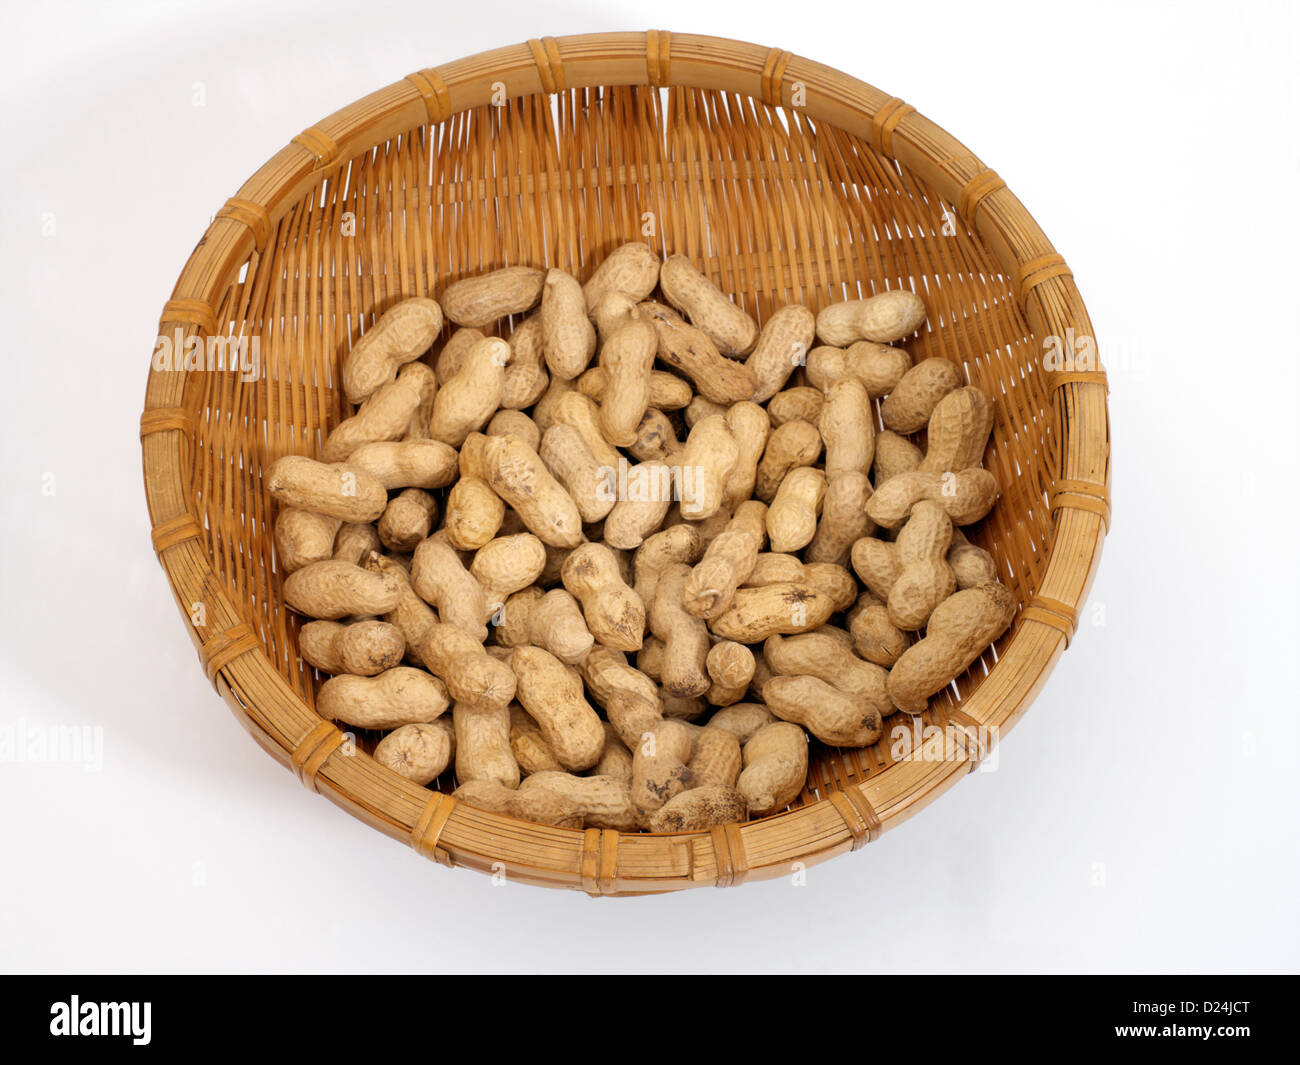 Peanuts in their Shells in a Basket Stock Photo